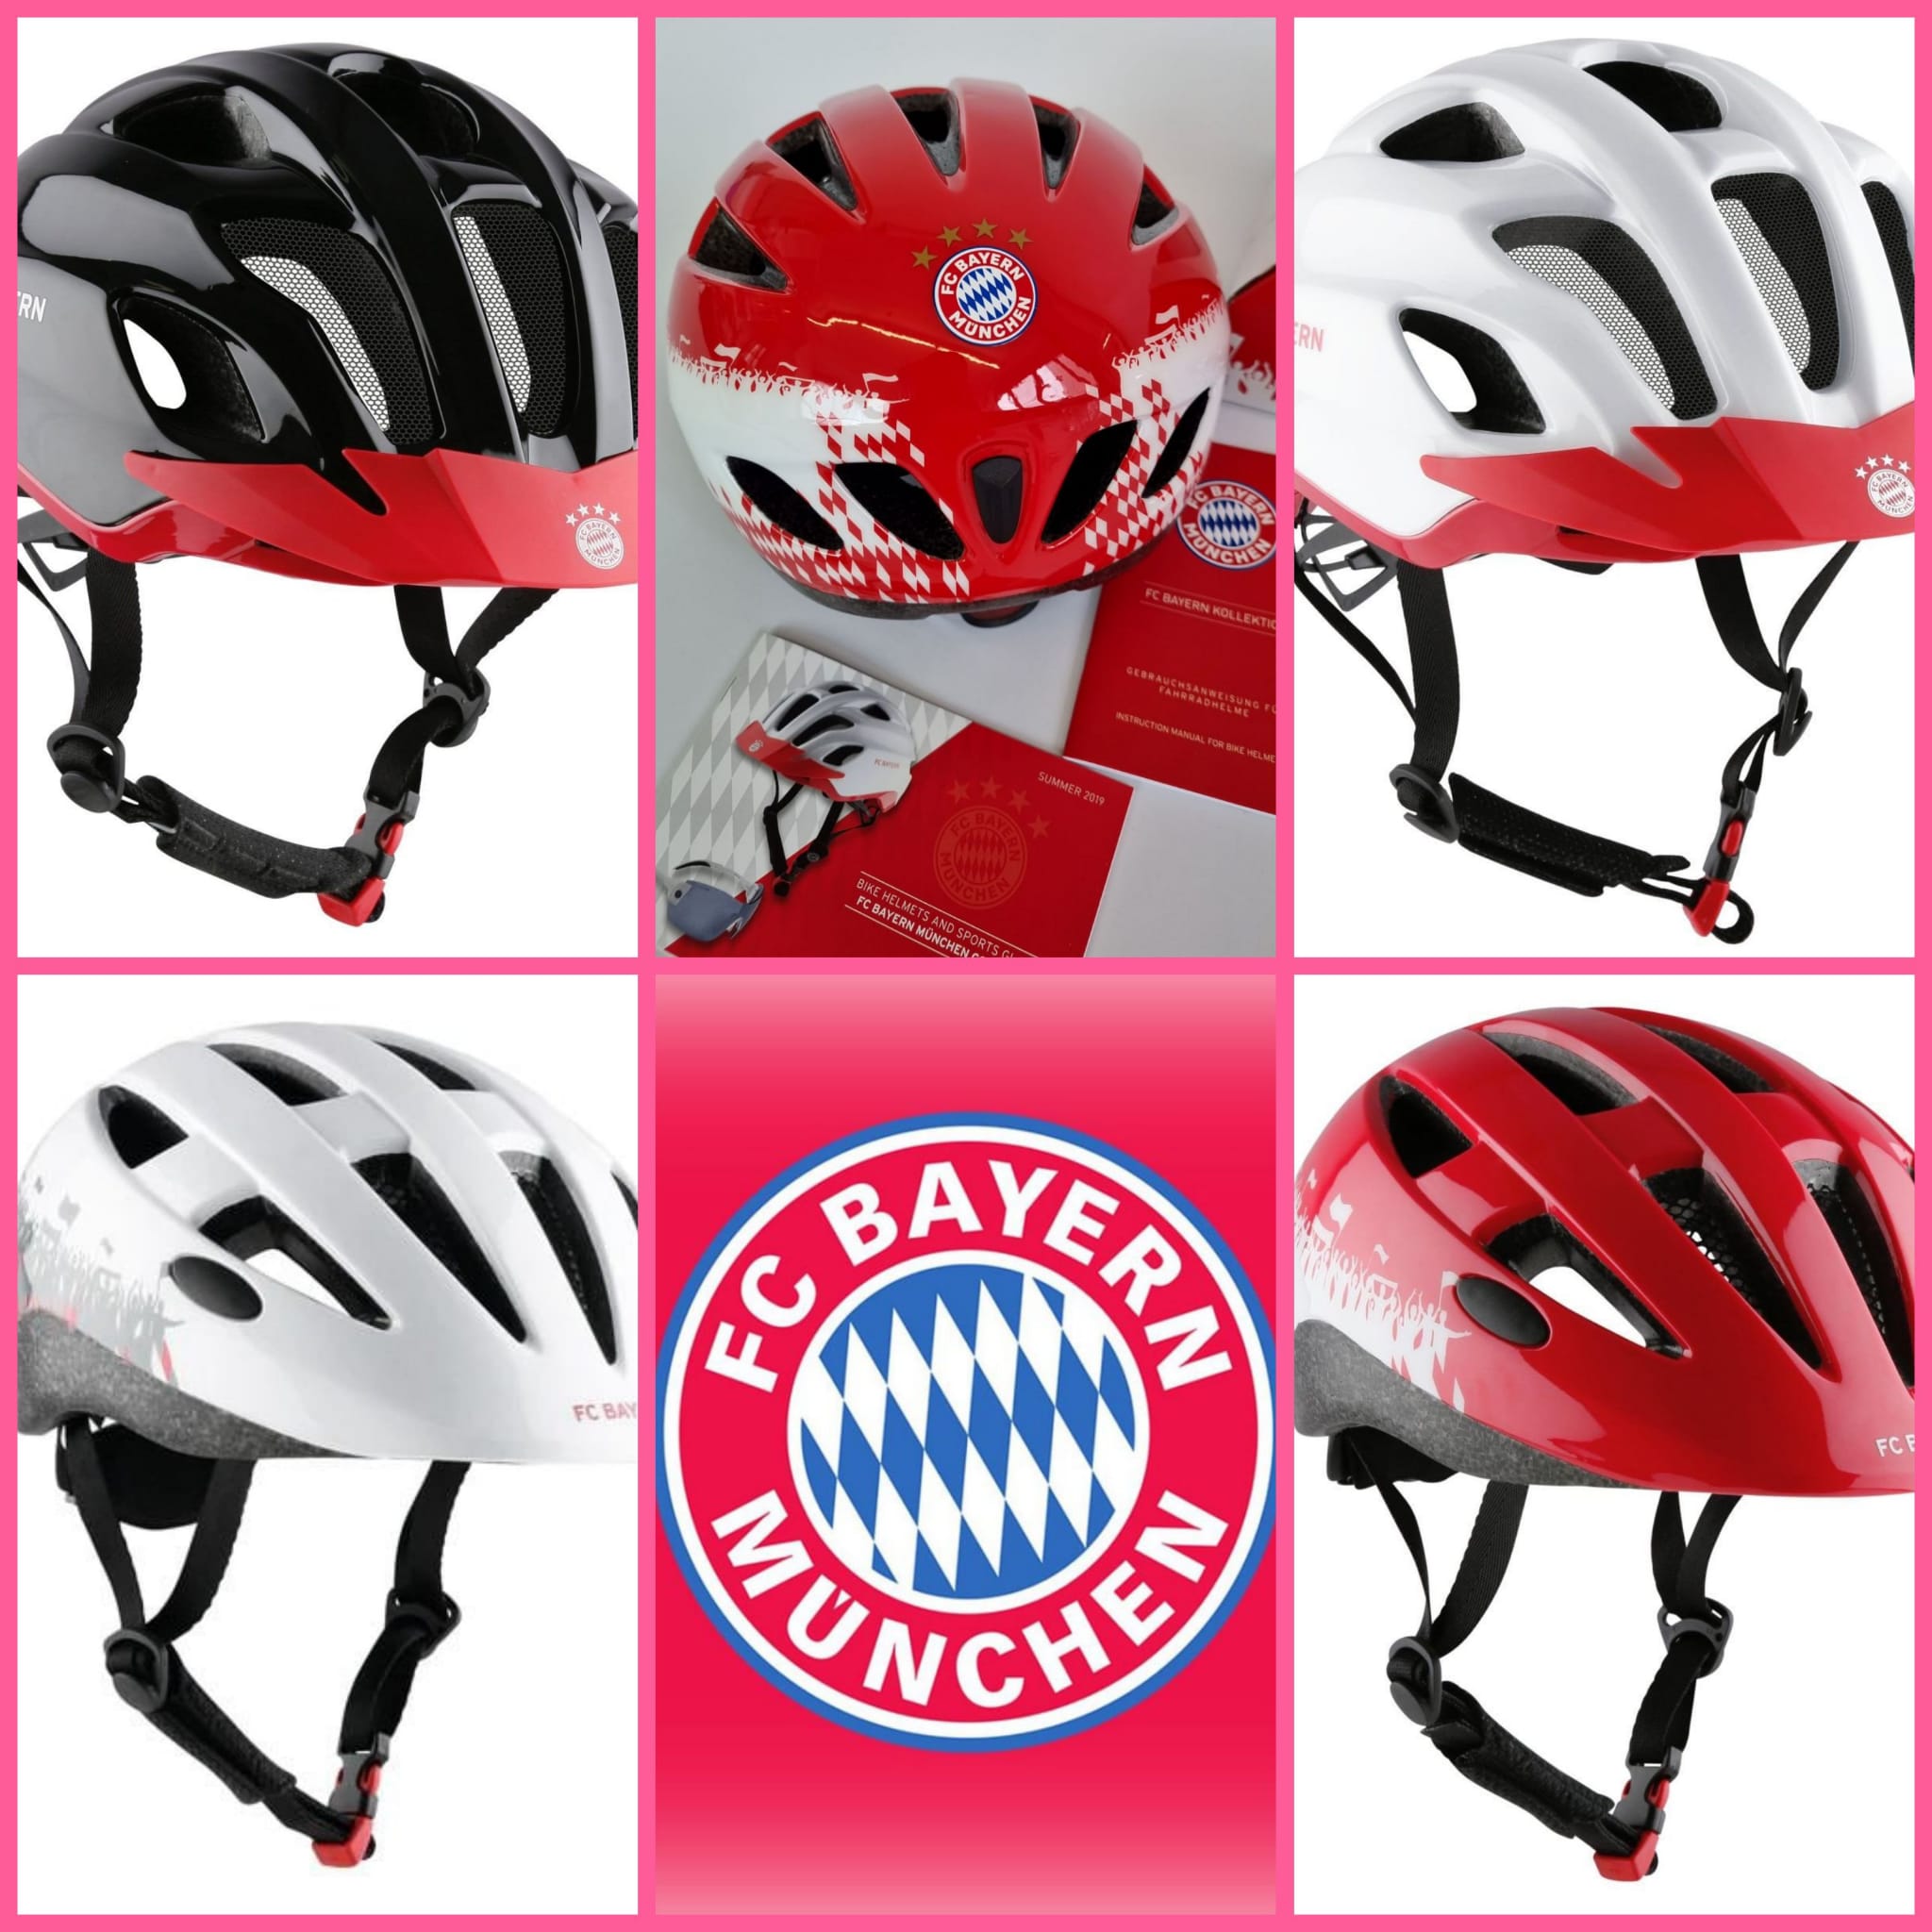 Cycling helmets from FC Bayern München